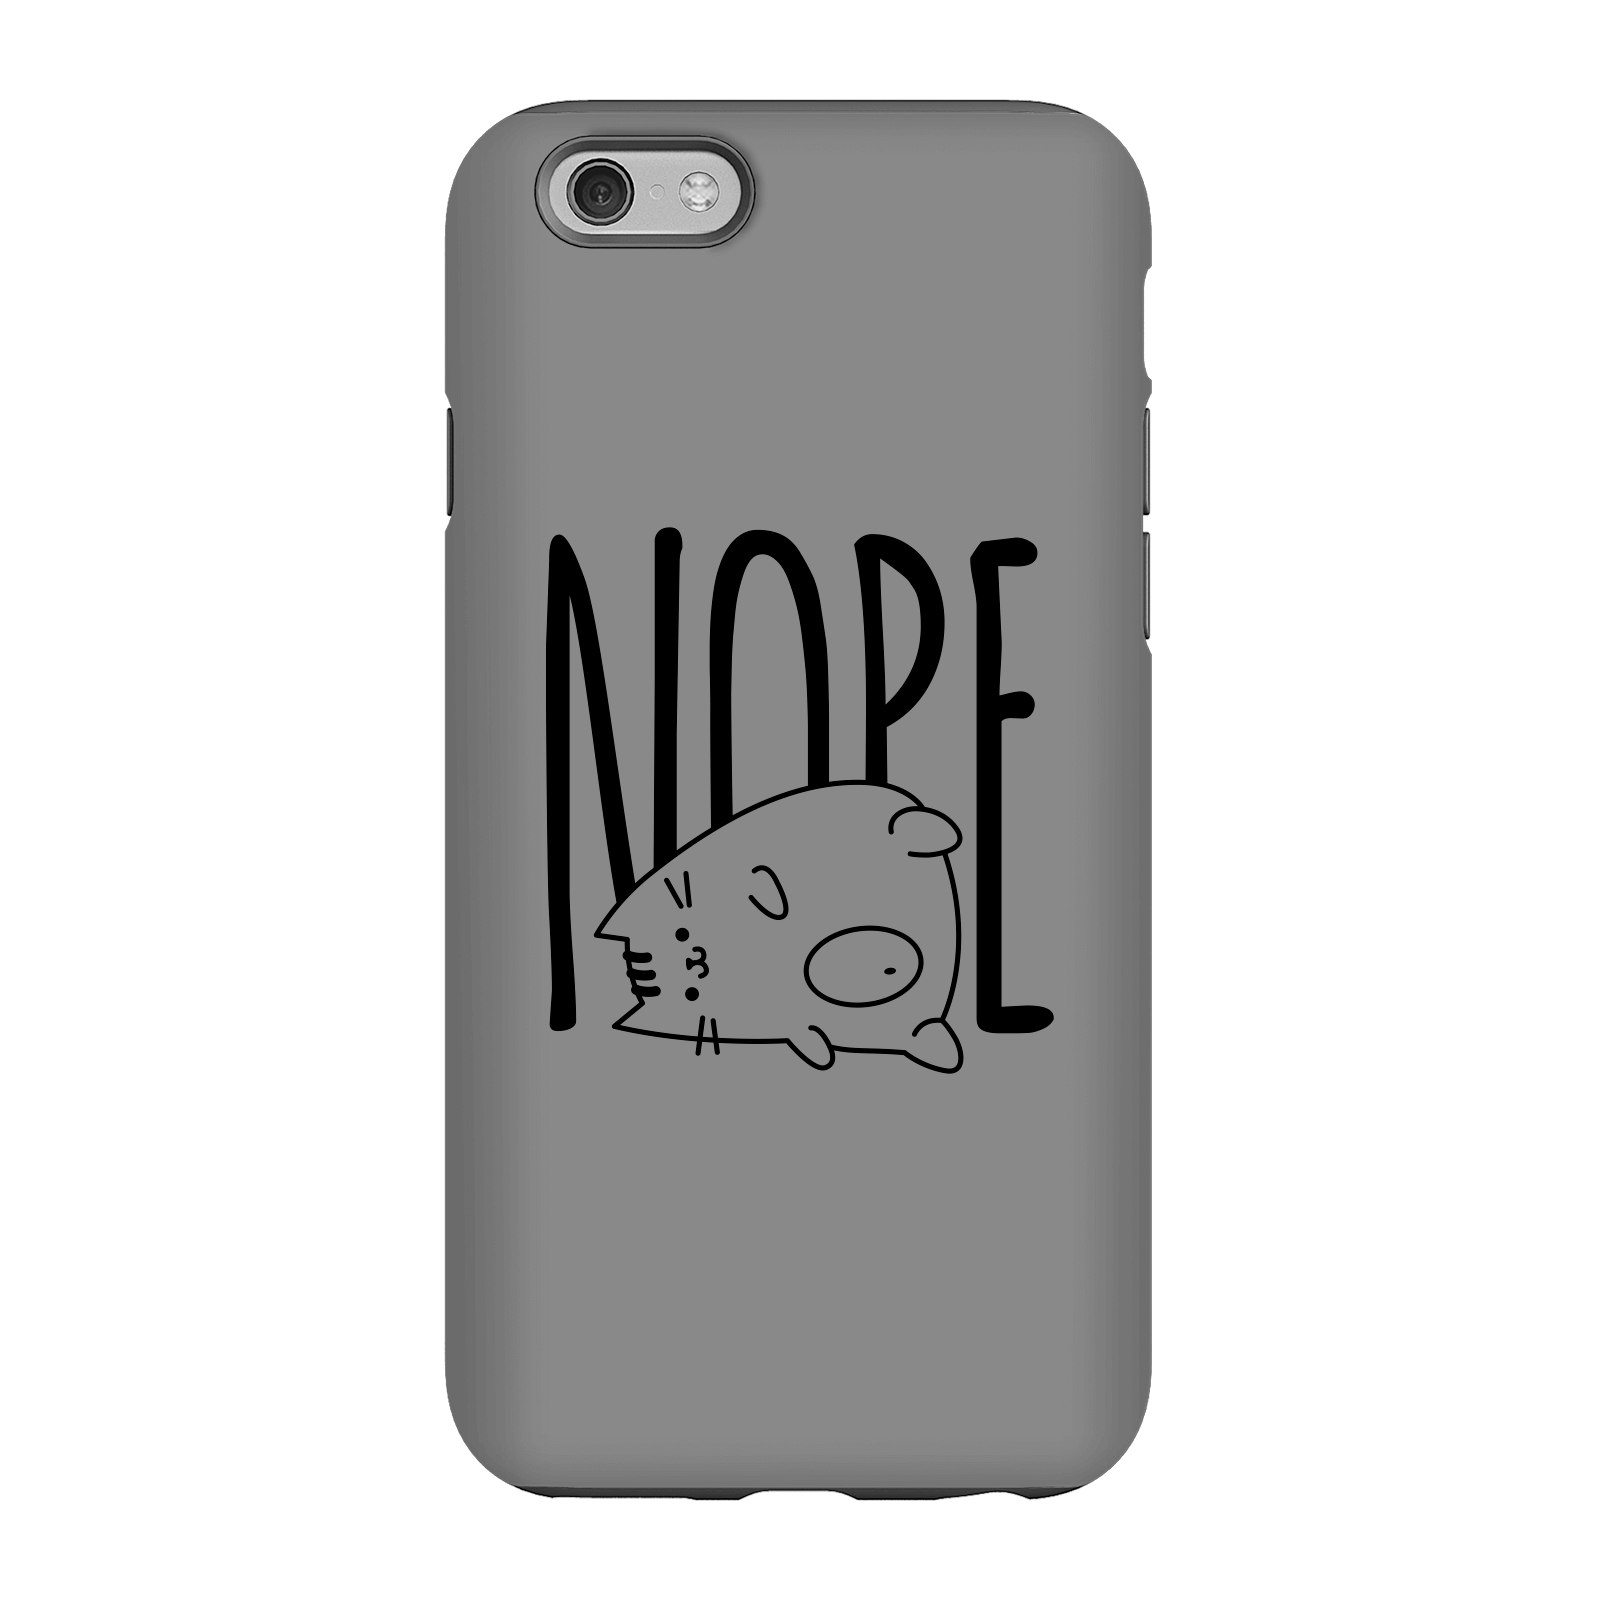 Nope Phone Case for iPhone and Android - iPhone 6S - Tough Case - Gloss